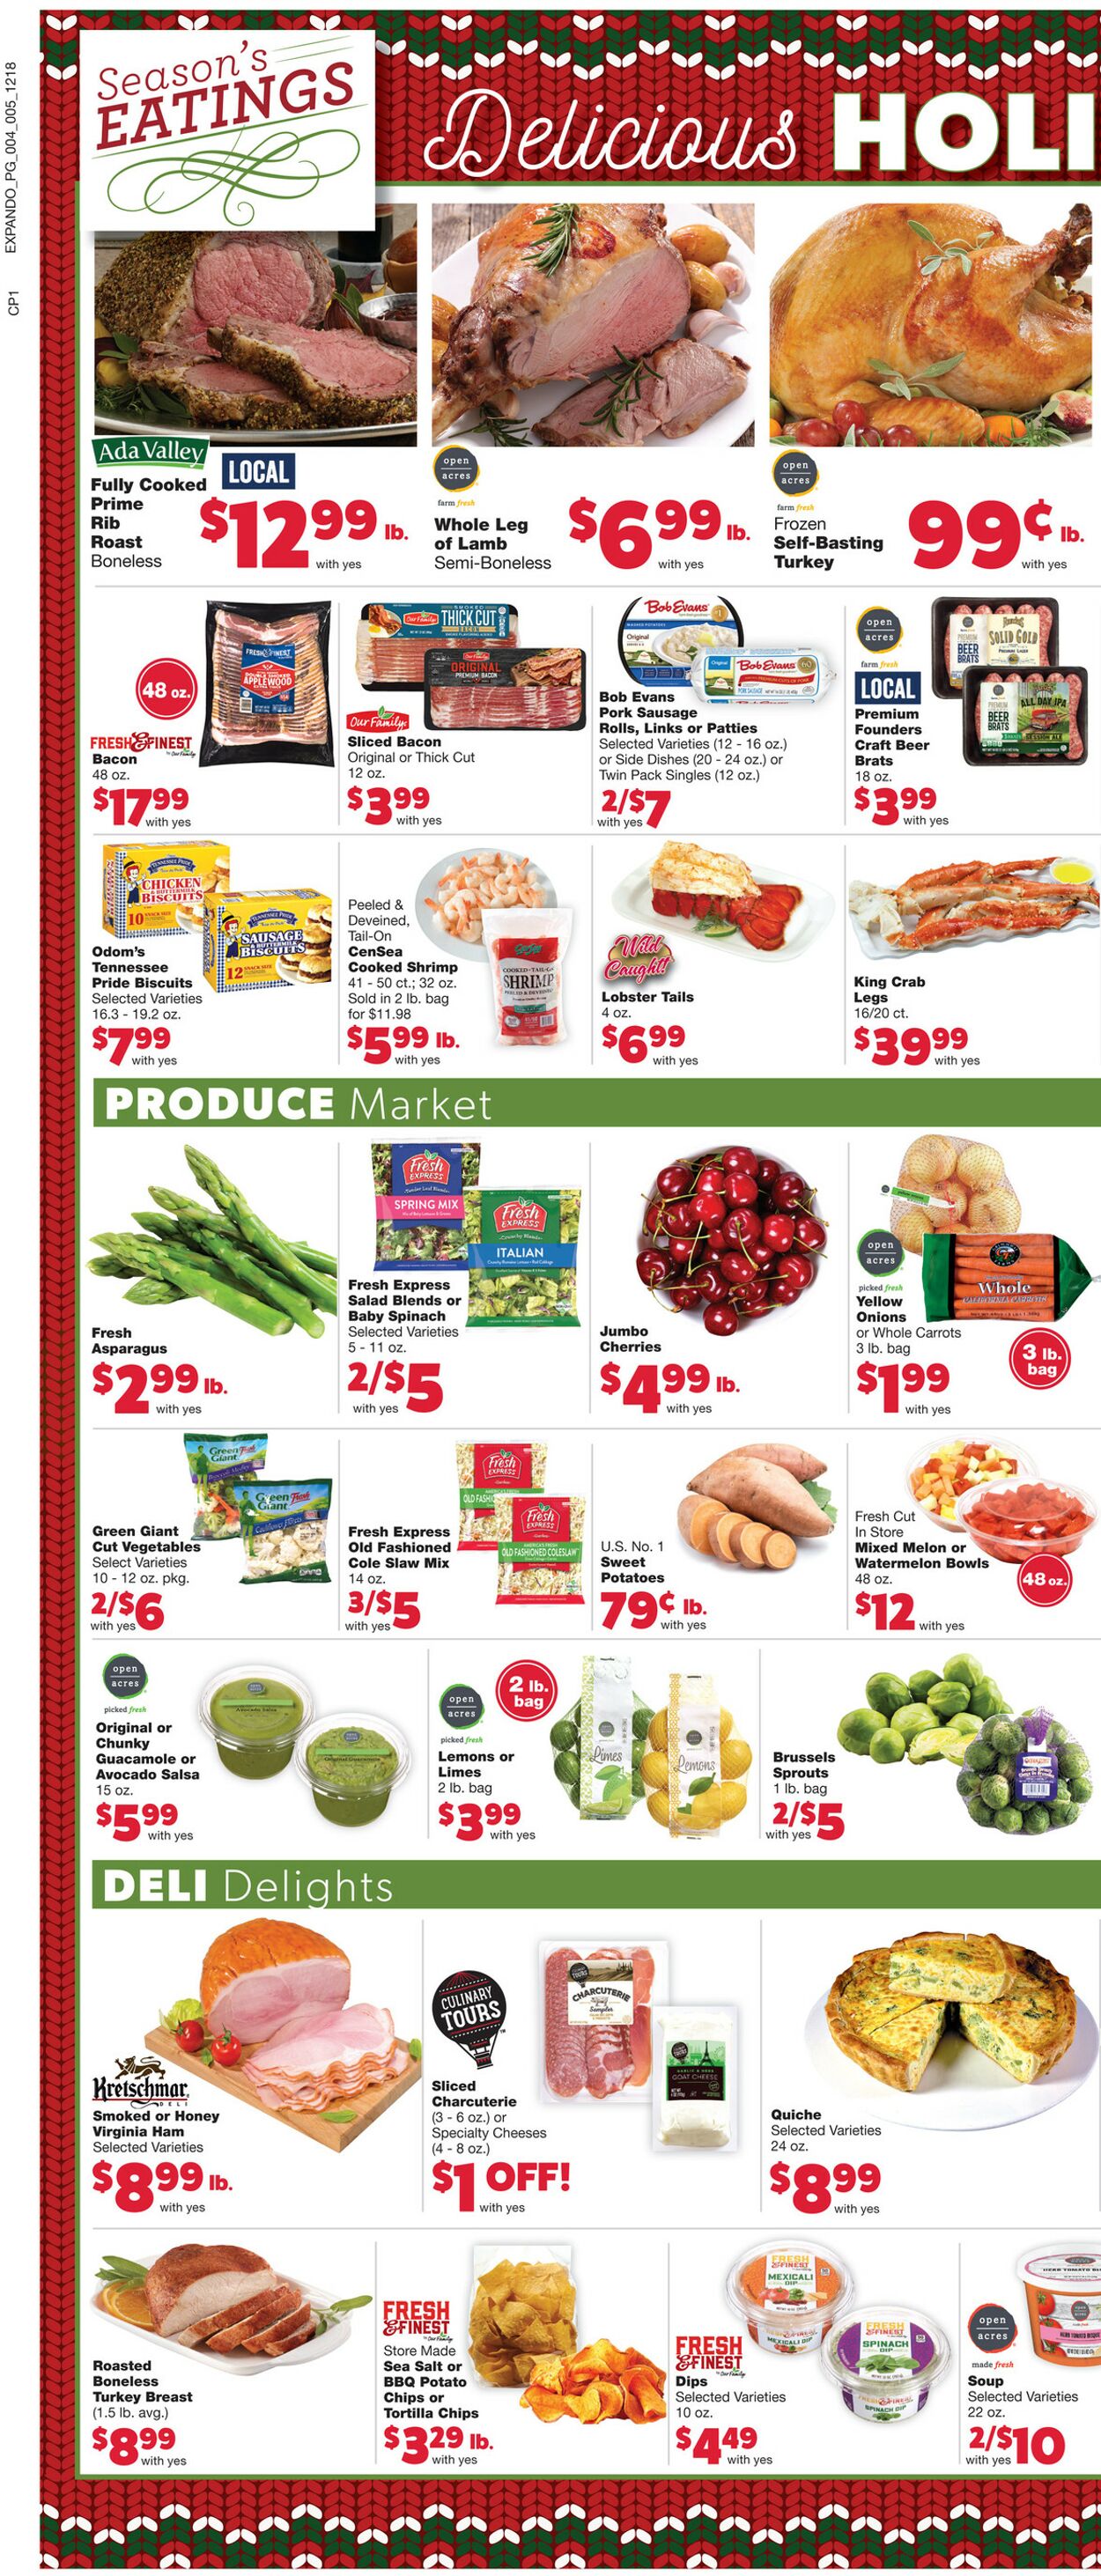 Weekly ad Family Fare 12/18/2022 - 12/24/2022